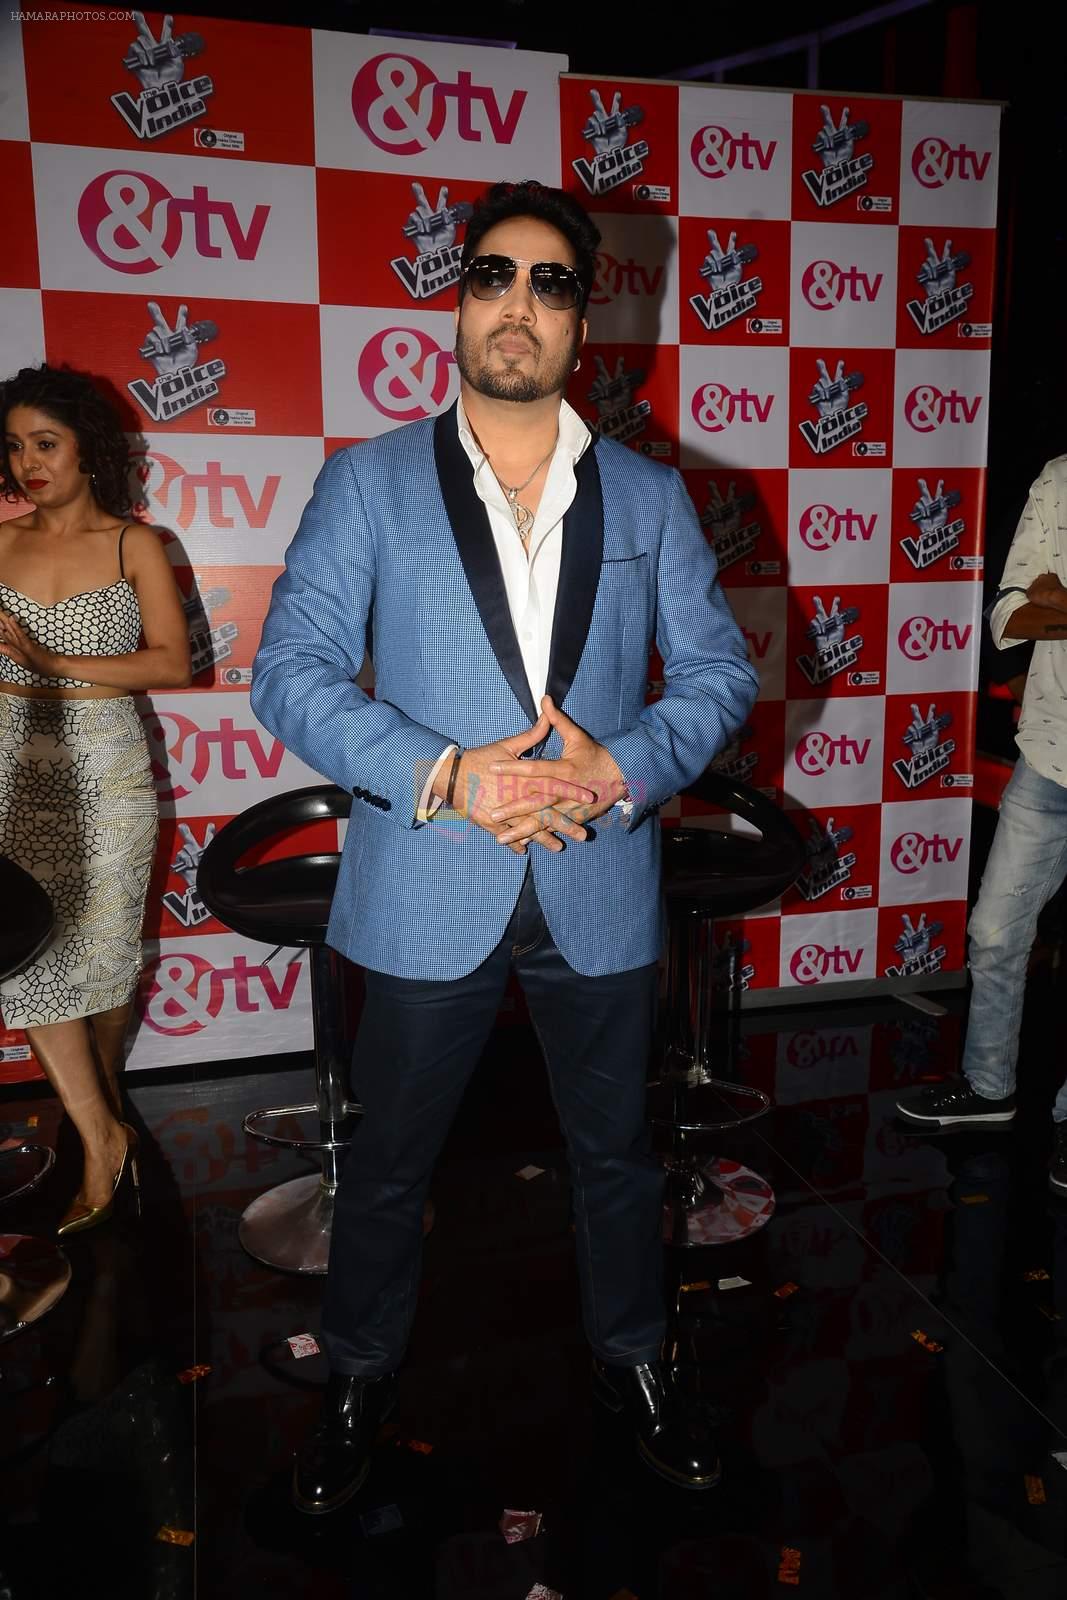 Mika Singh at The Voice launch in Mumbai on 19th May 2015